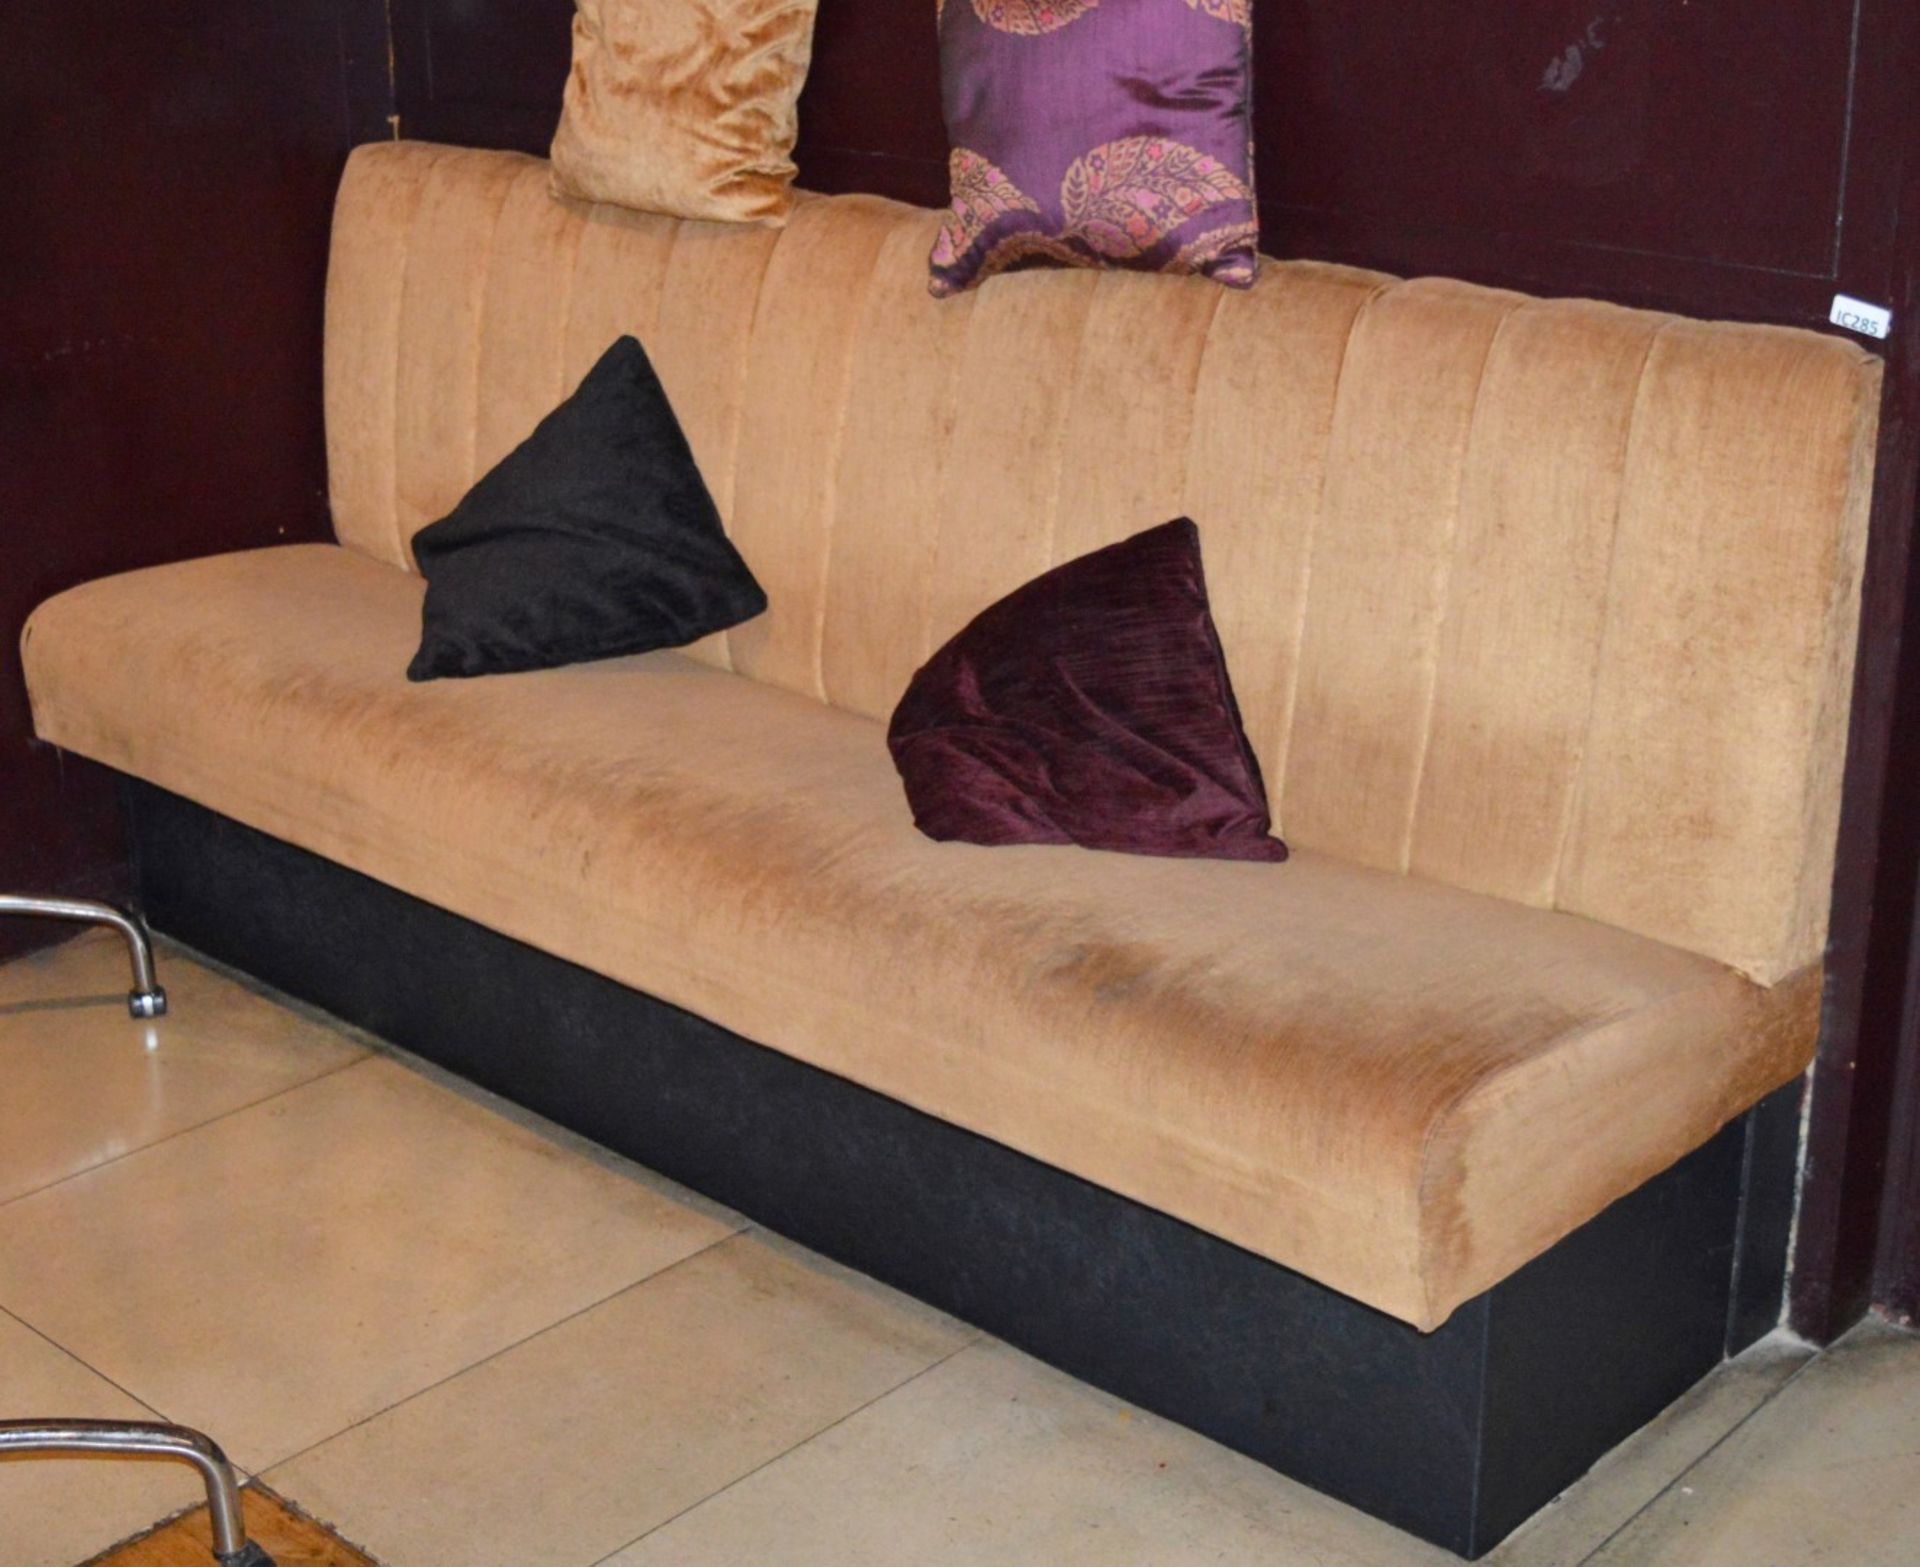 1 x High Back Seating Booth - Upholstered in Golden Fabric - CL180 - Includes 4 Cushions - Ref IC285